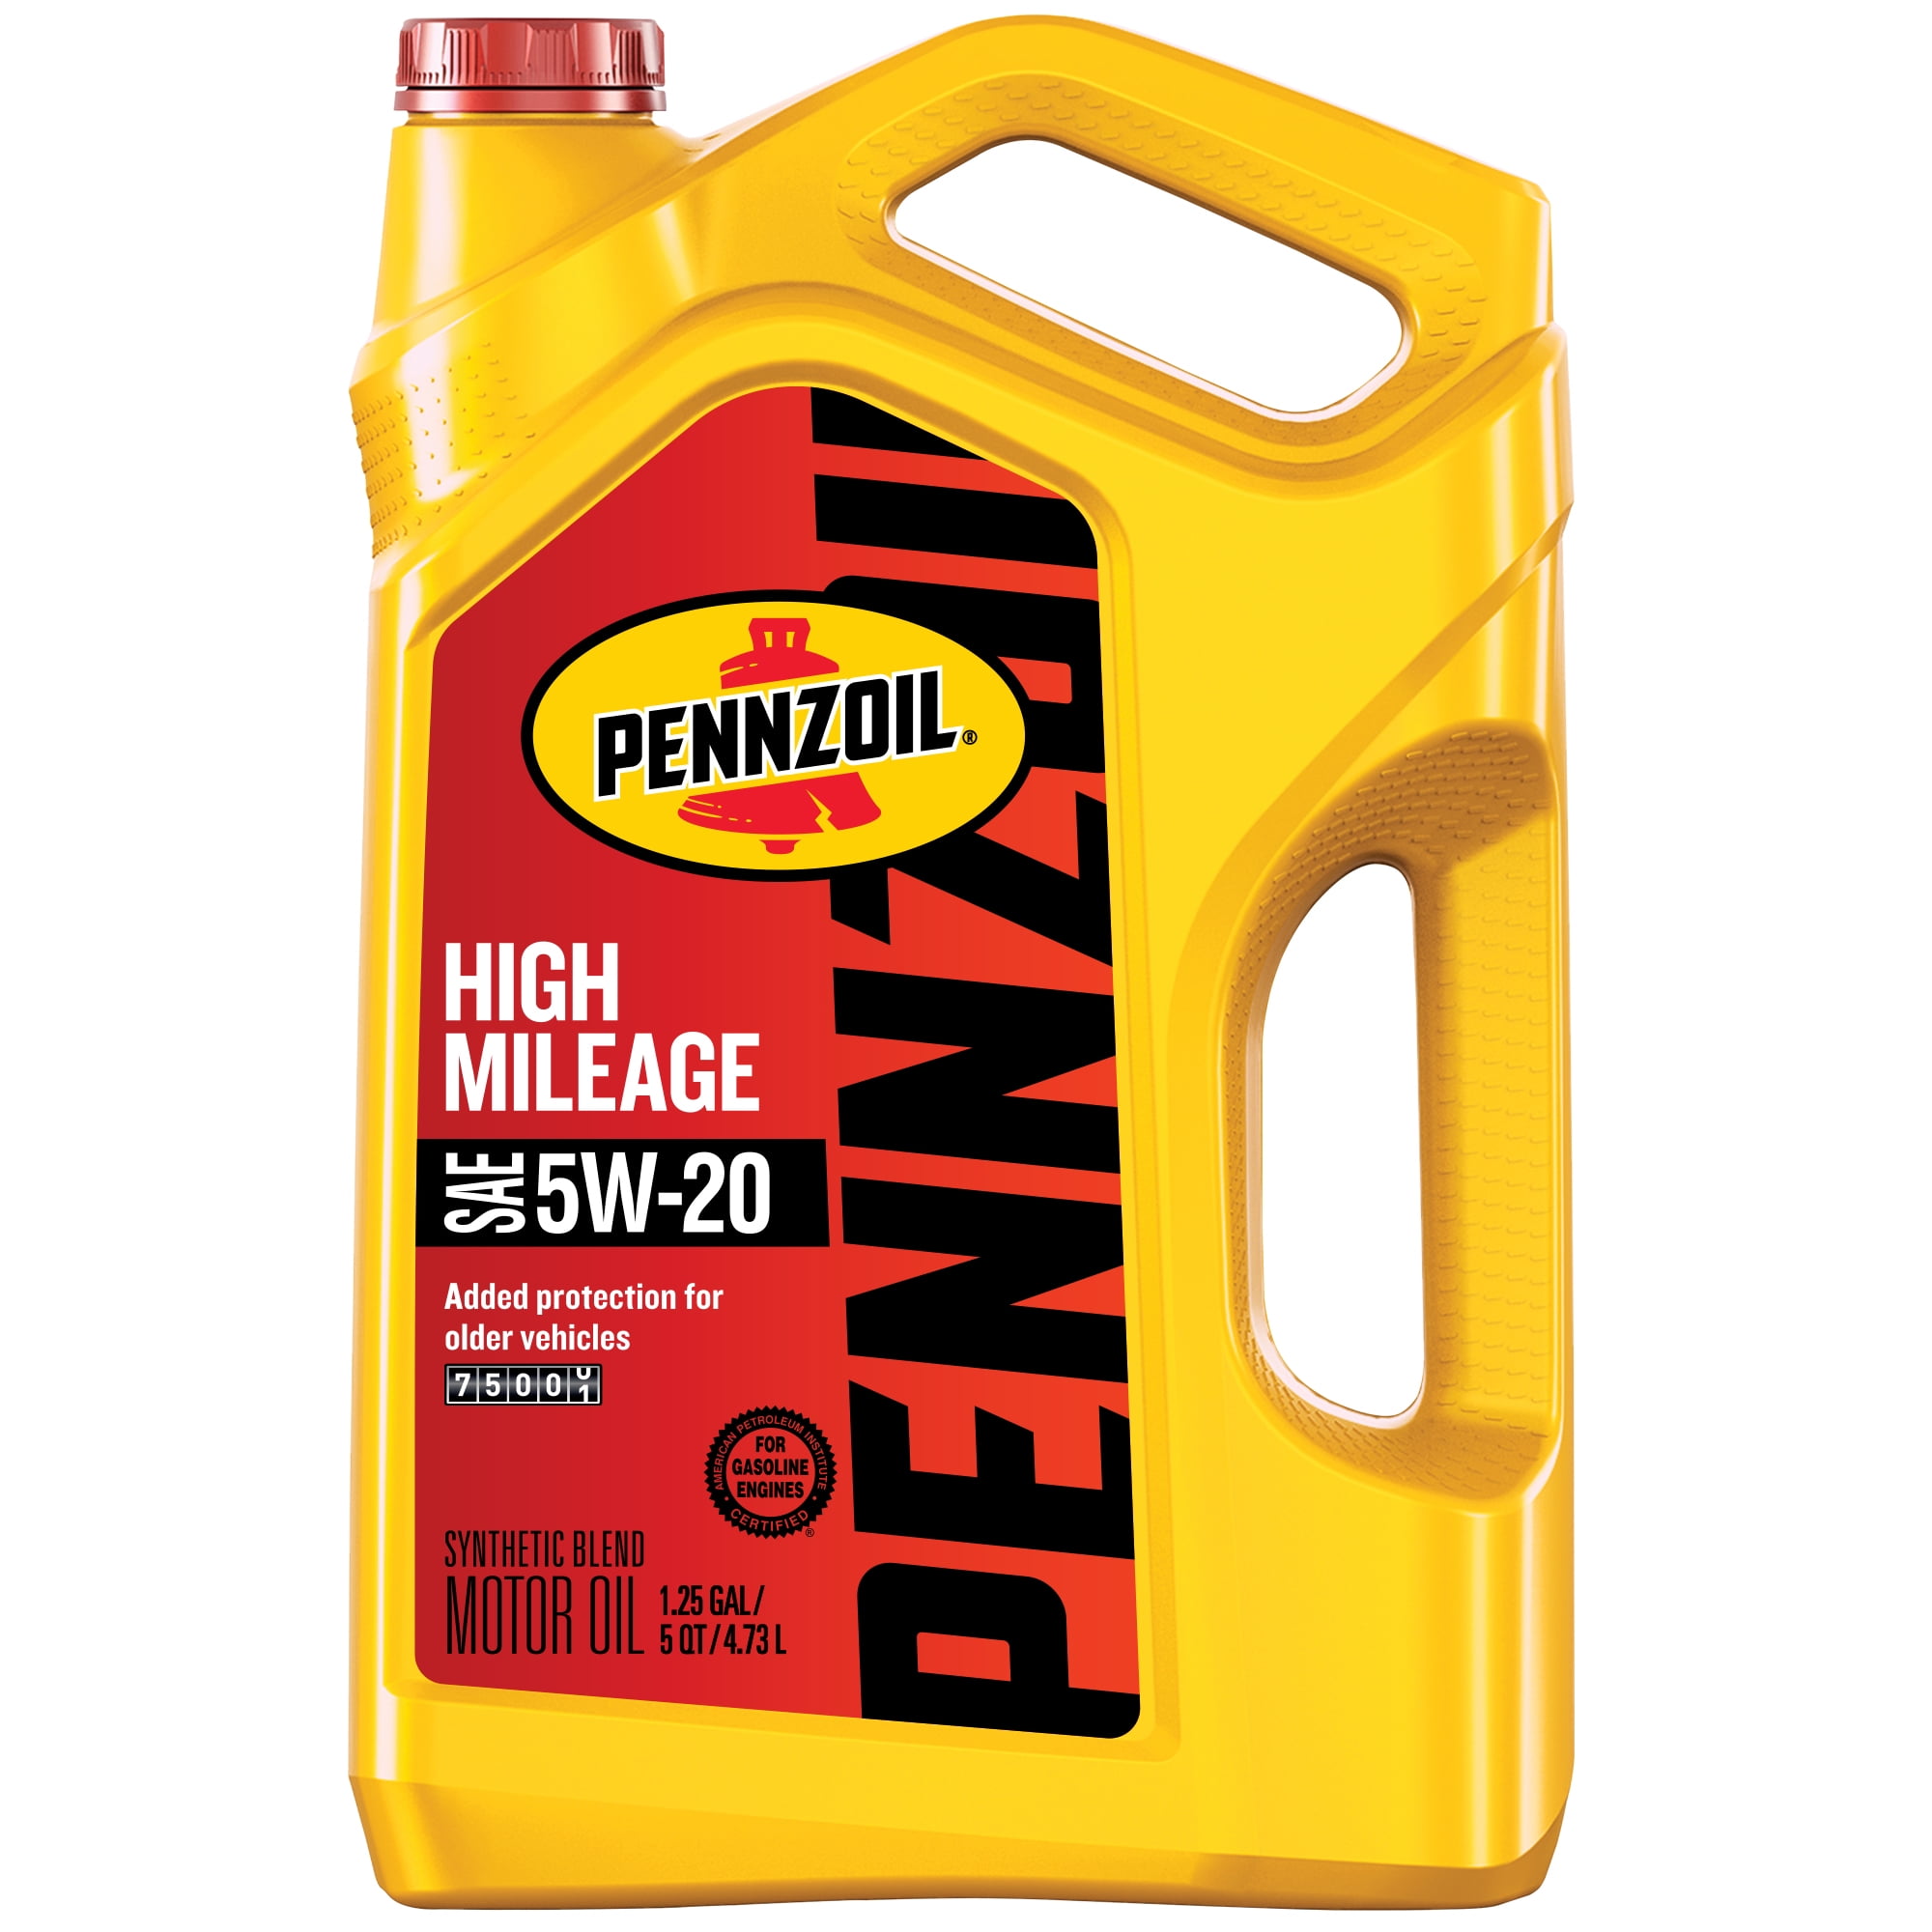 Pennzoil High Mileage 5w 20 Motor Oil For Vehicles Over 75k Miles 5